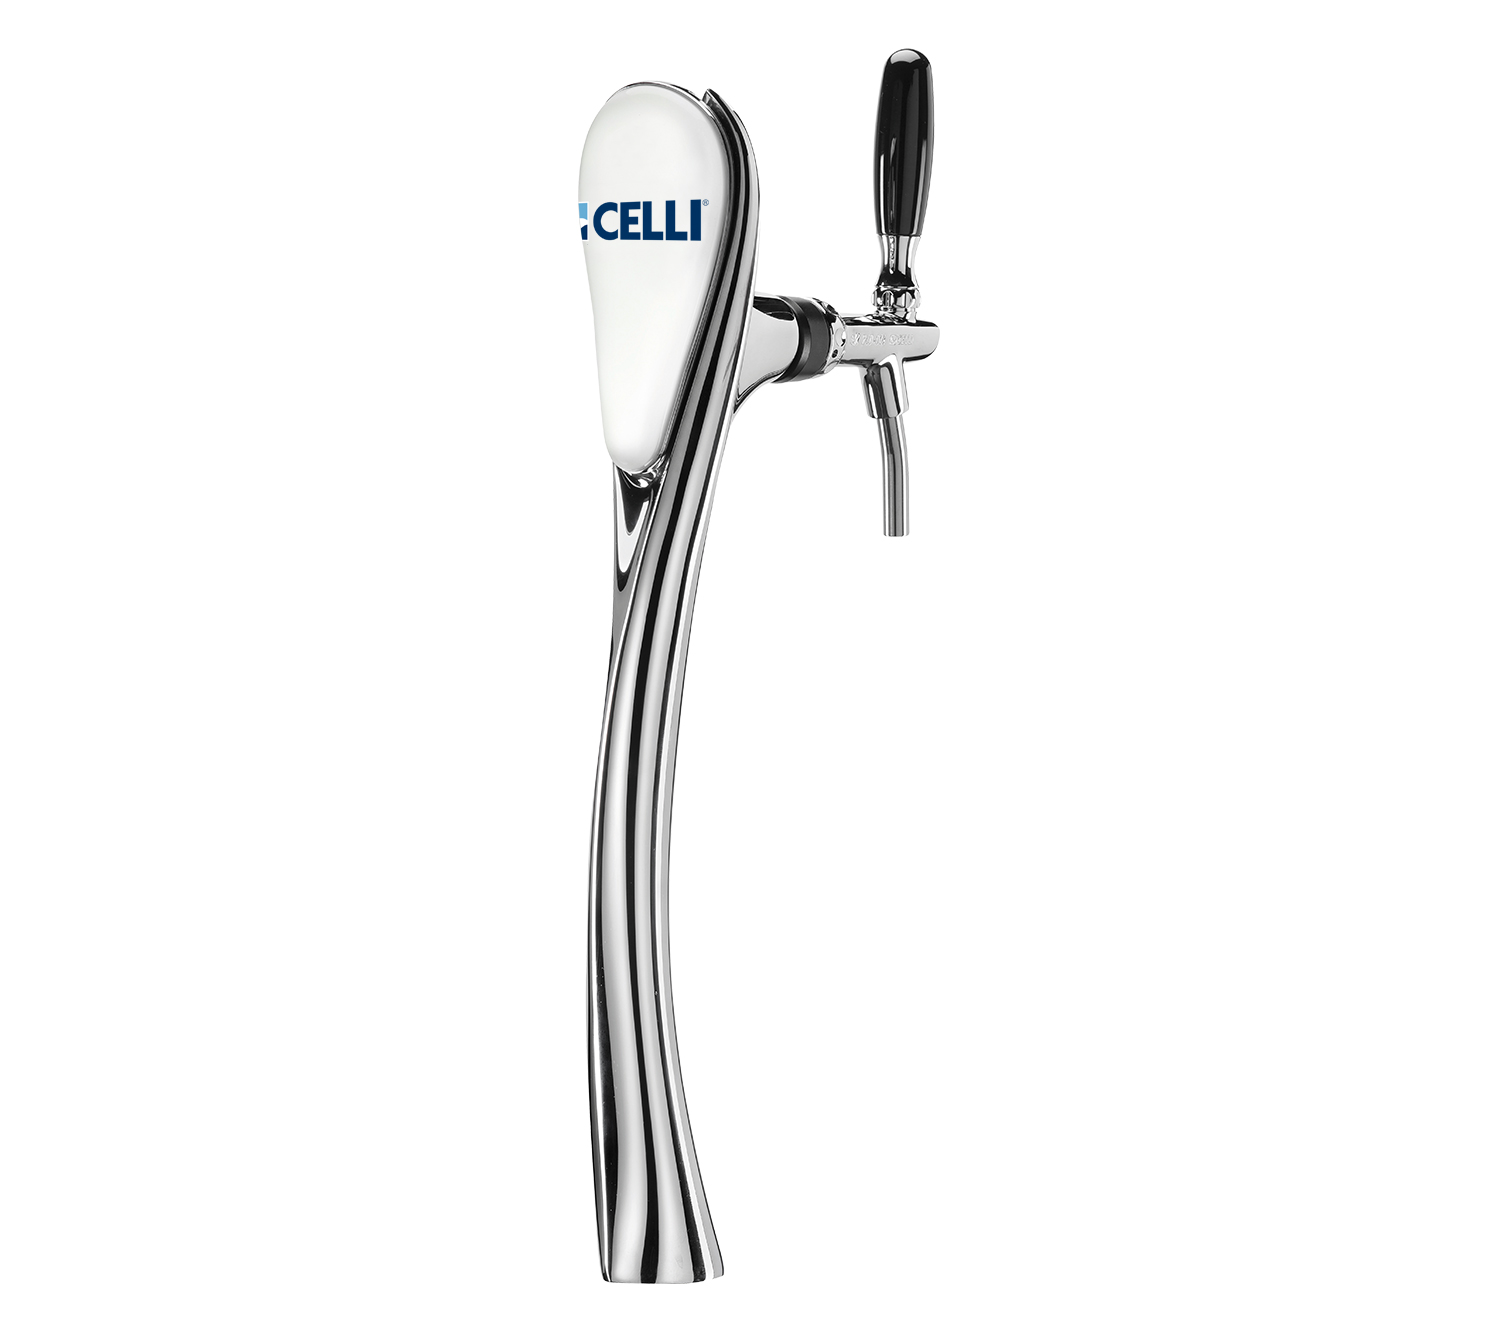 CELLI Extreme Drop - Draught beer font